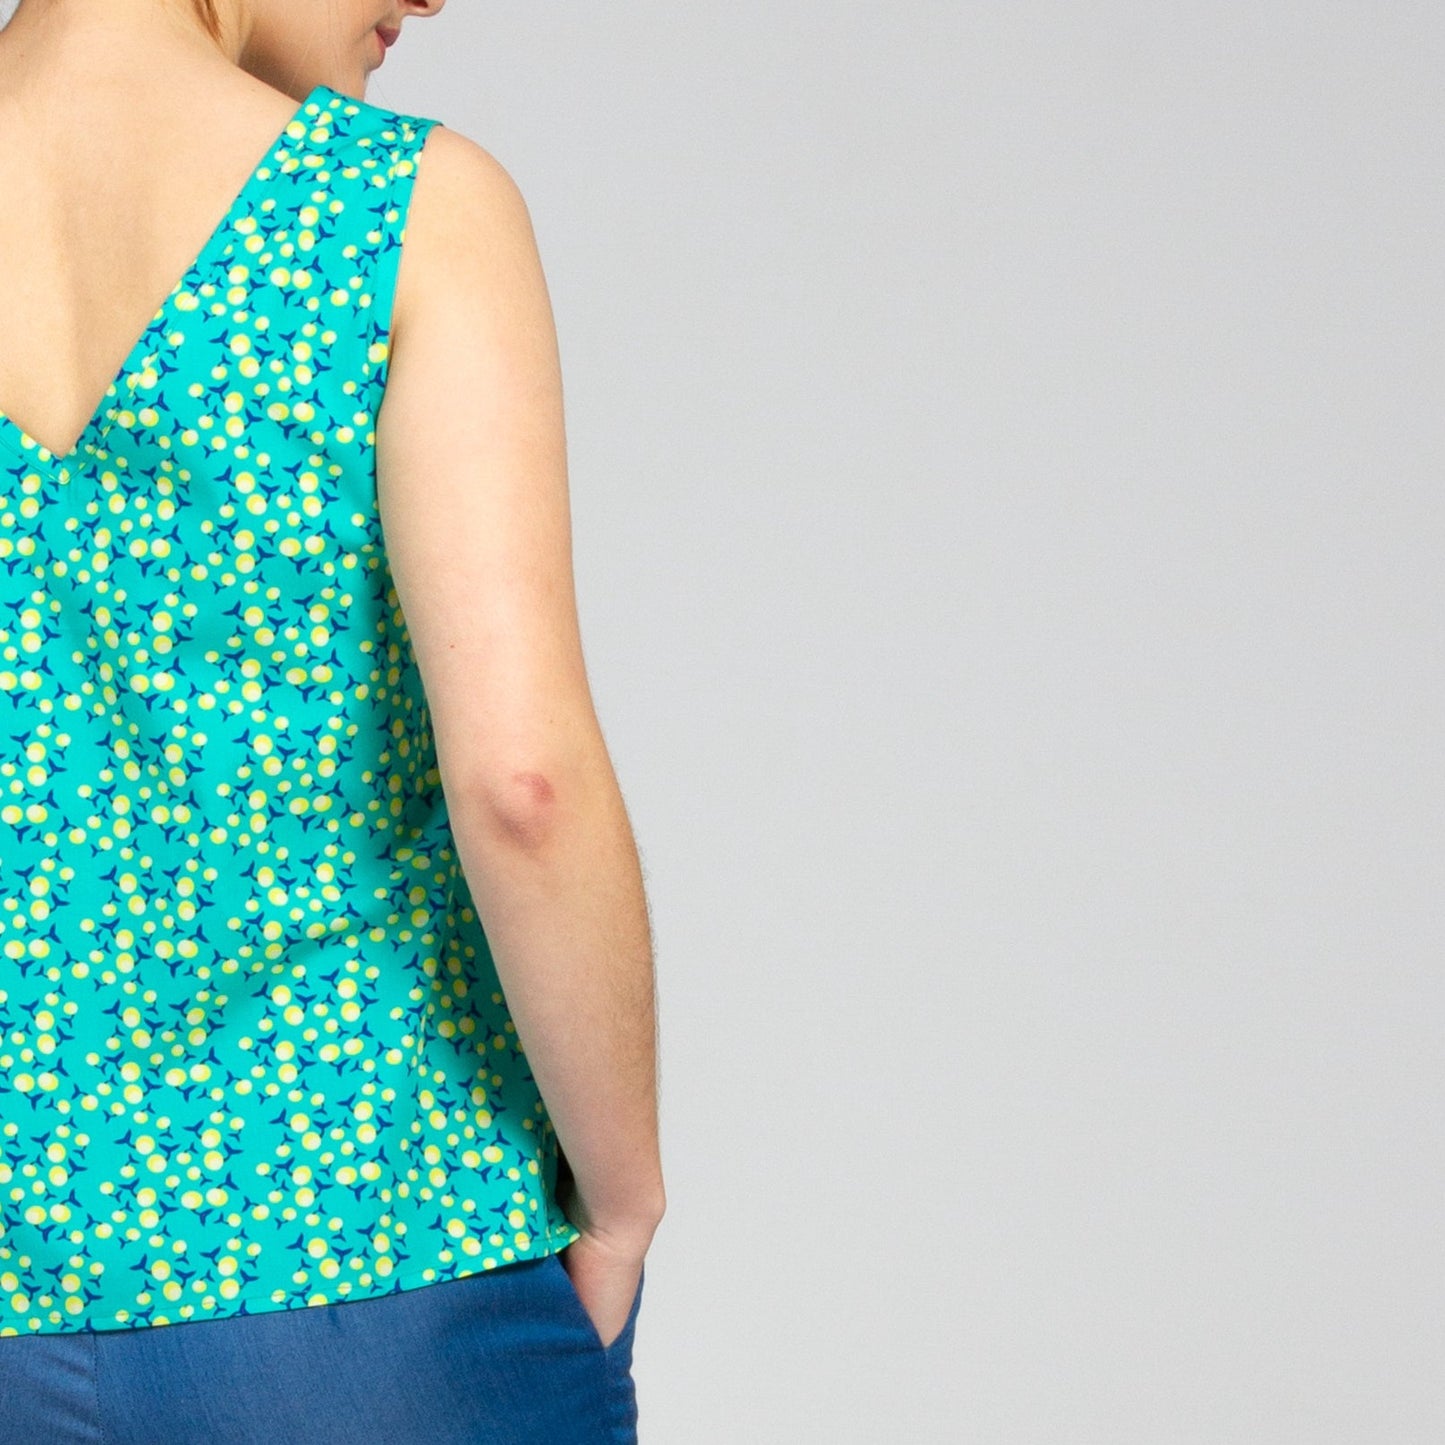 MIRIAM TOP WITH WHALE TAIL PRINT